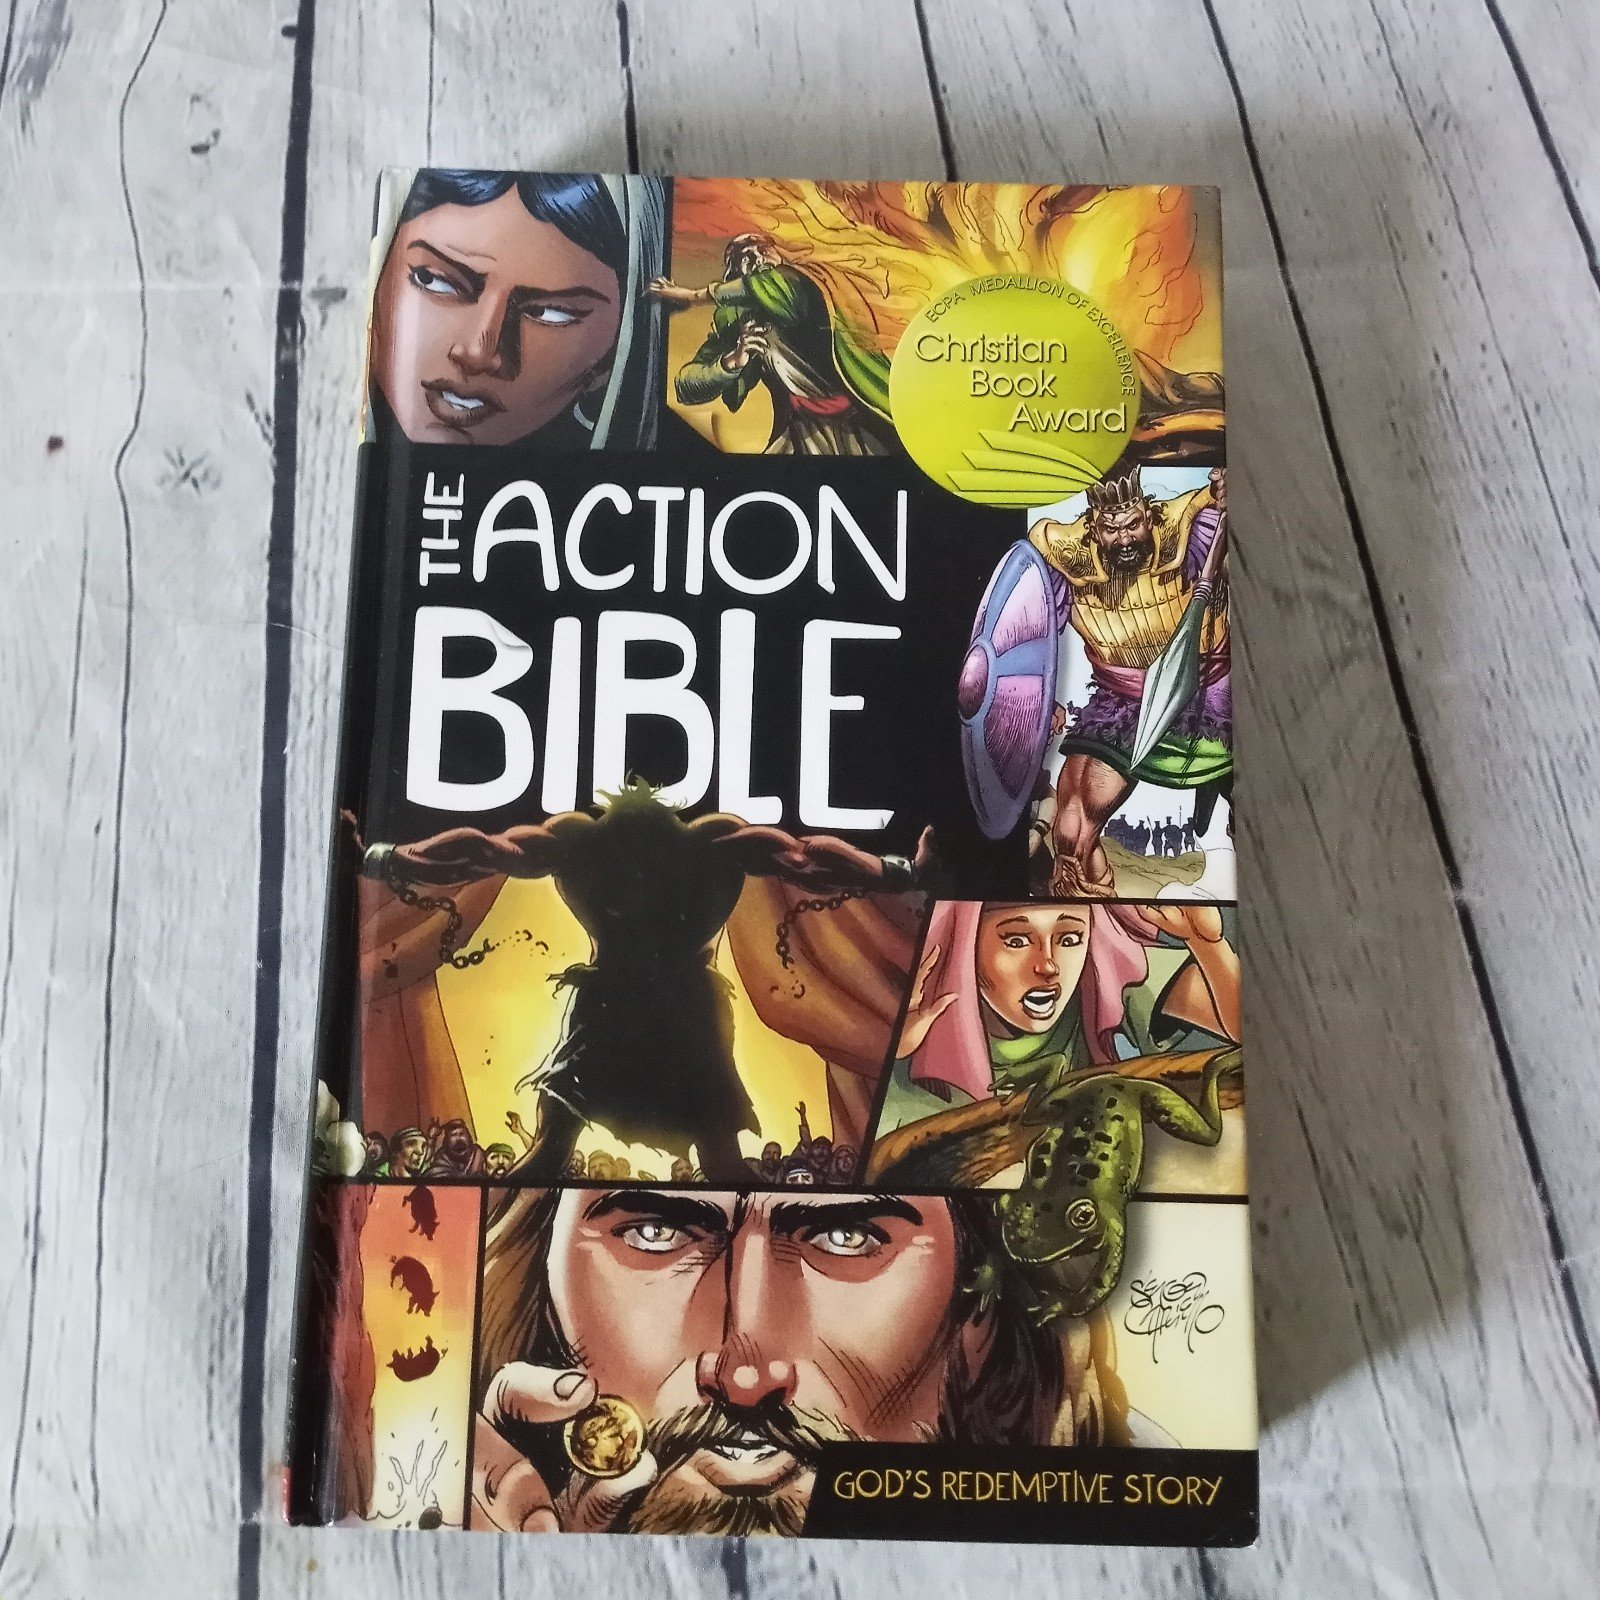 New The Action Bible book 7uoRcIyLz